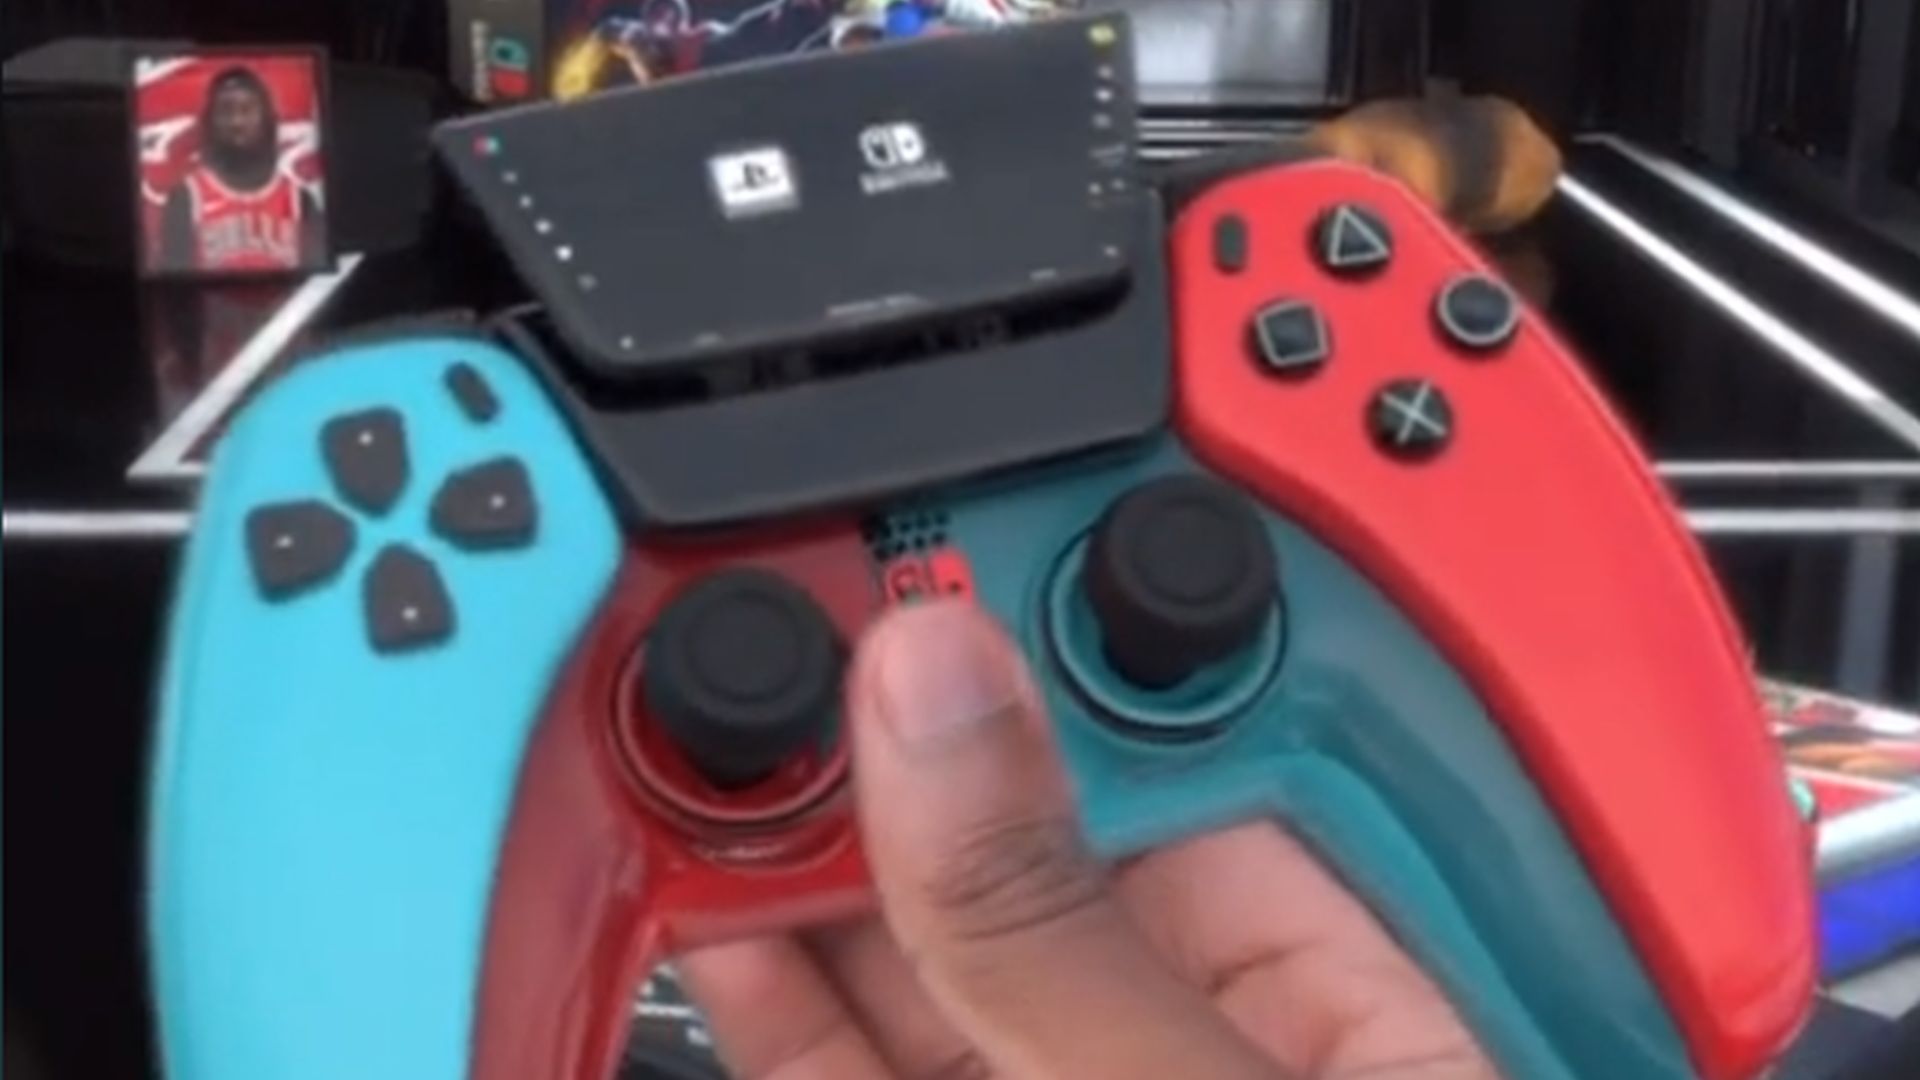 ps controller nintendo switch